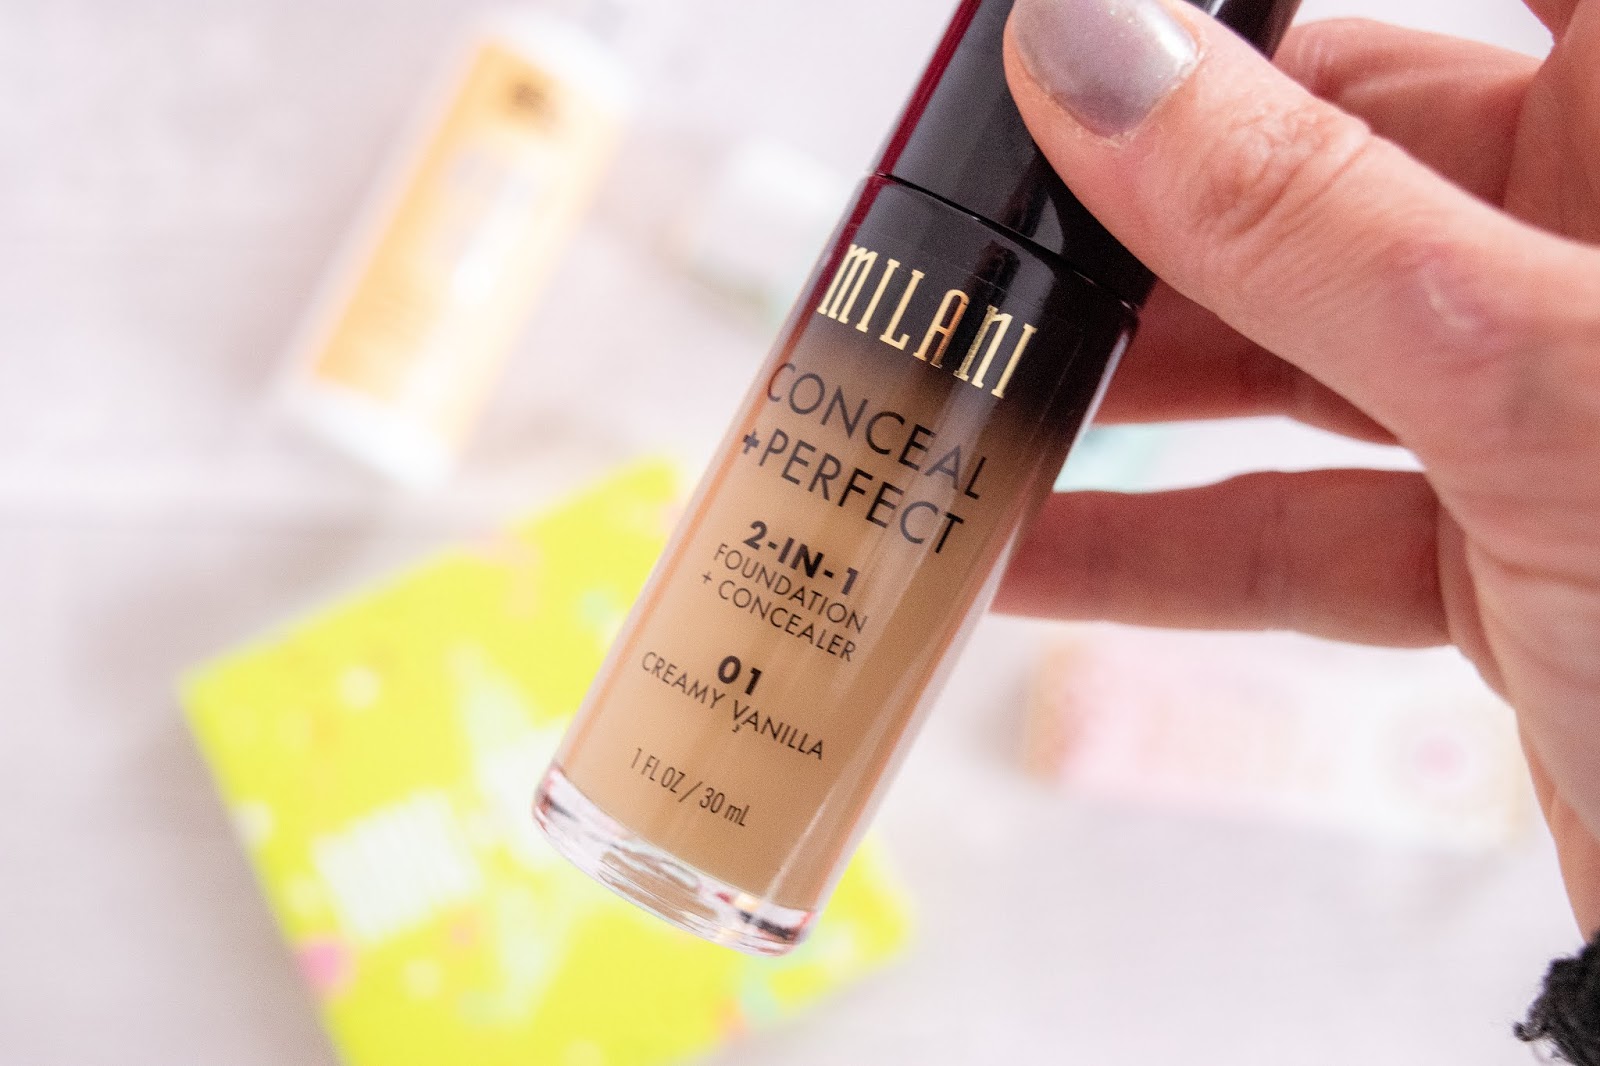 A close up of the Milani 2 in 1 Foundation and Concealer. The bottle is glass with a black top and contains a fair skin toned liquid.